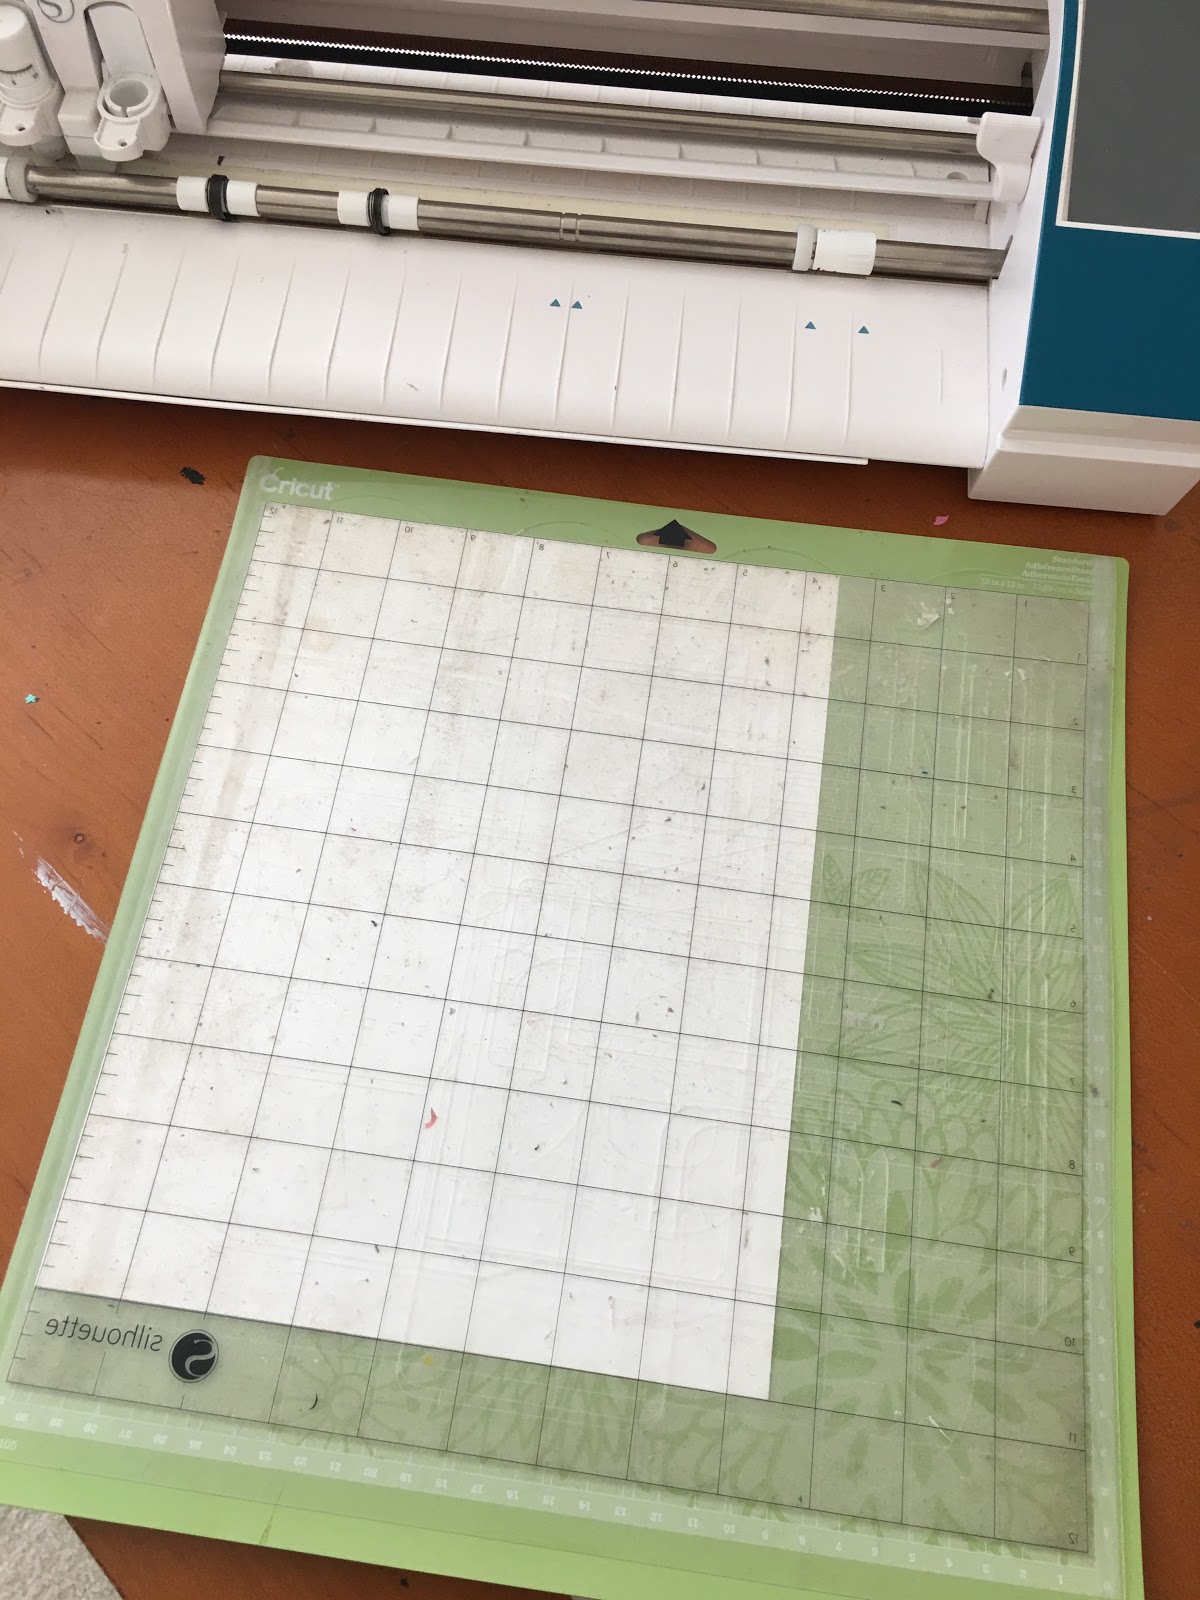 How To Clean and Restick a Cricut Mat - Conquer Your Cricut, Cameo